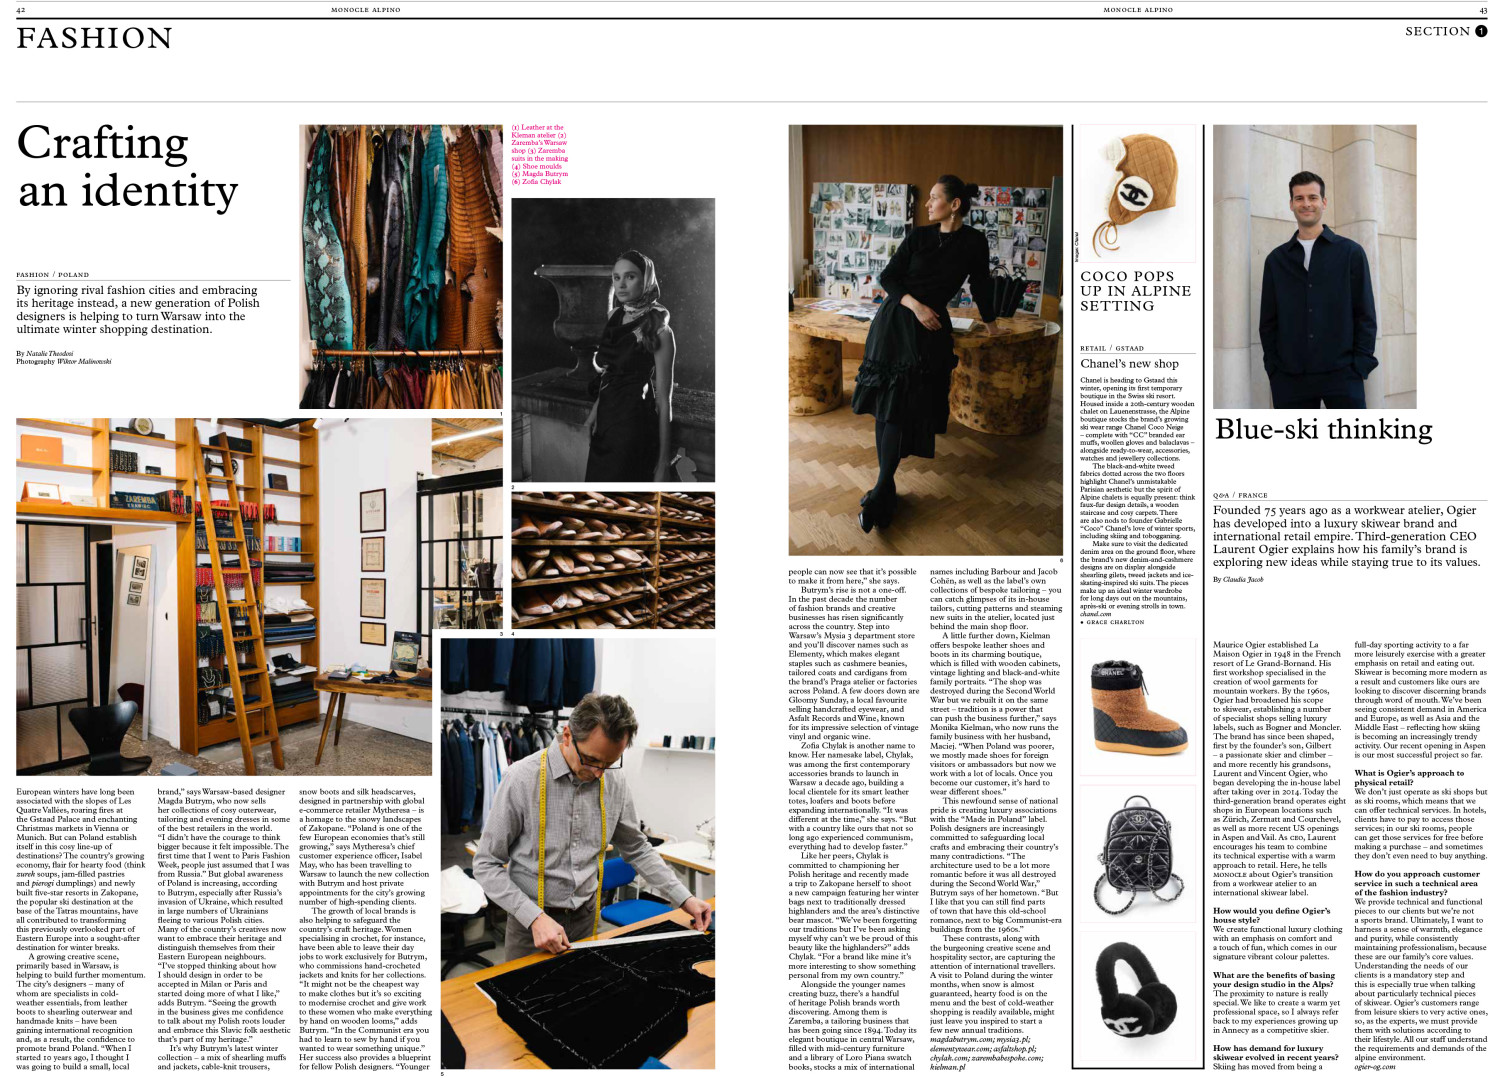 Monocle: Crafting an identity